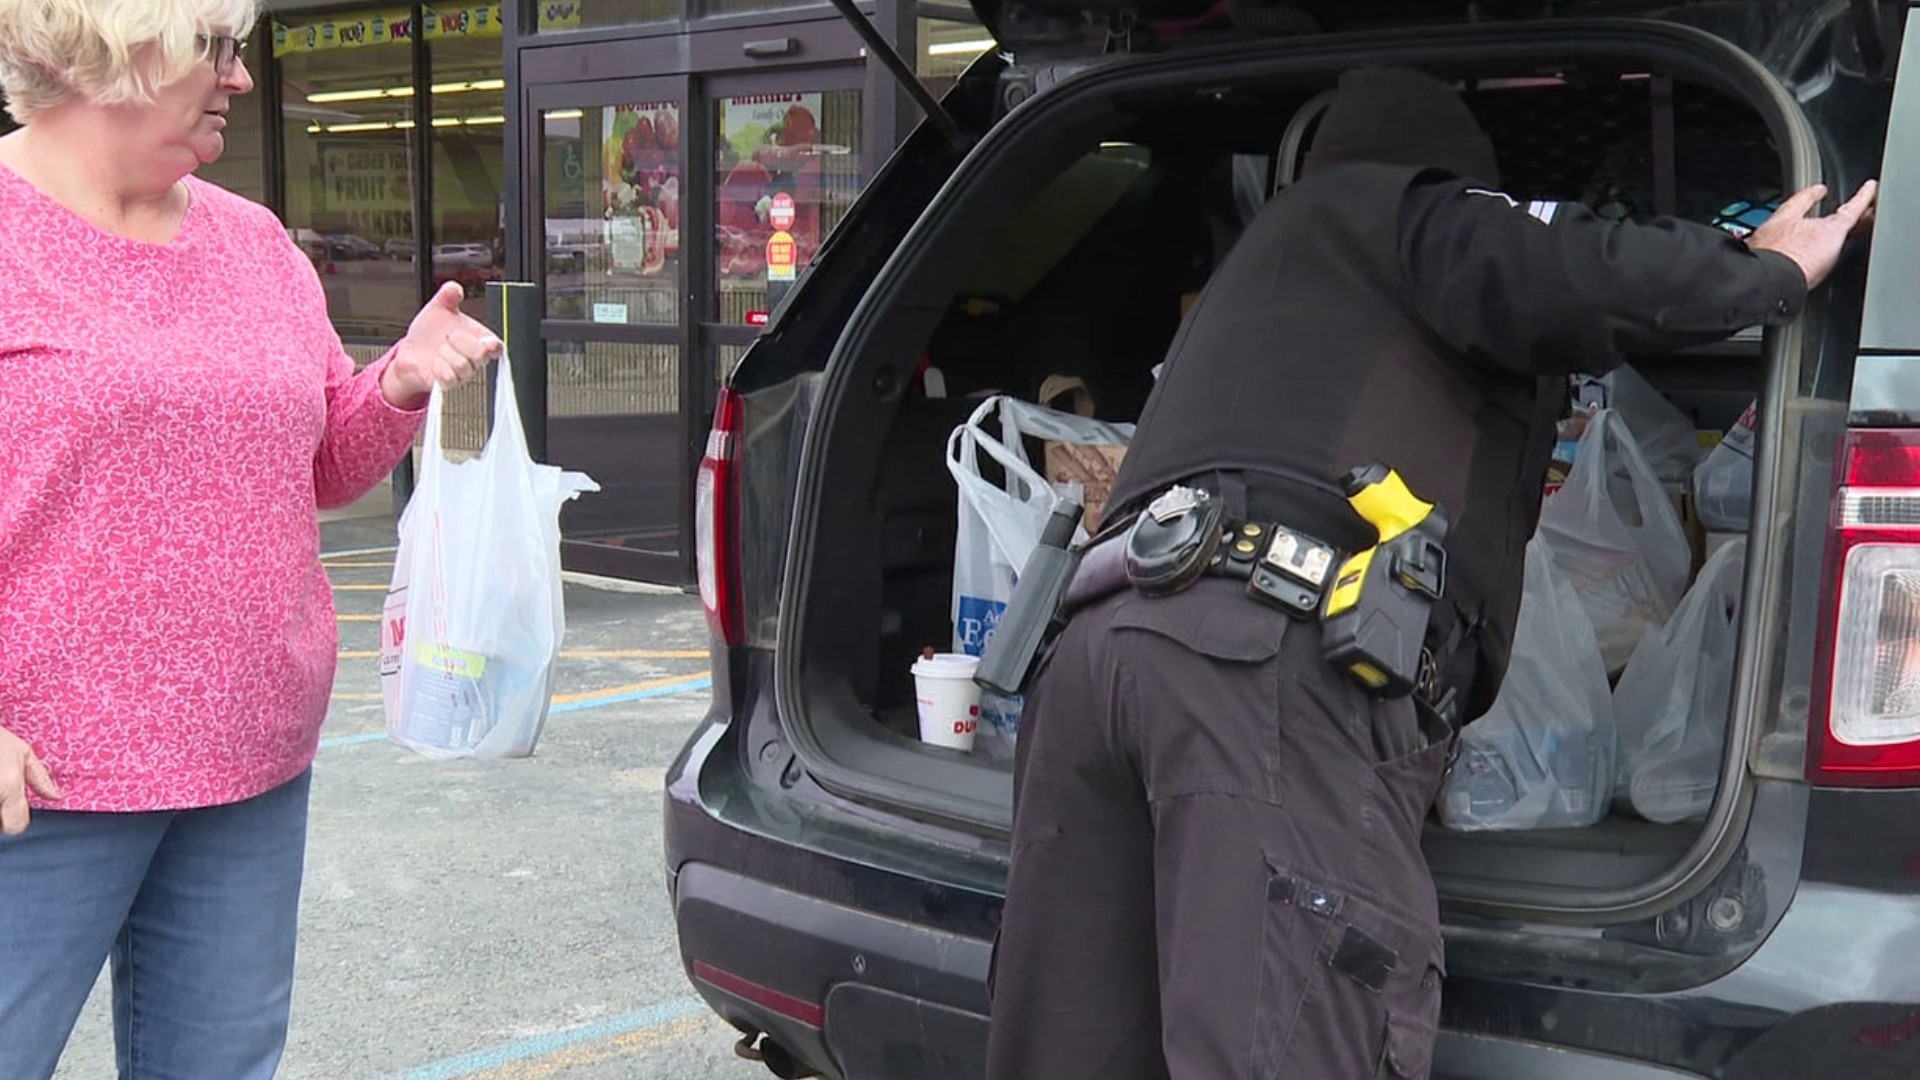 This is the fifth year for the collection in Montrose, and officers say the community is always eager to help out each year.